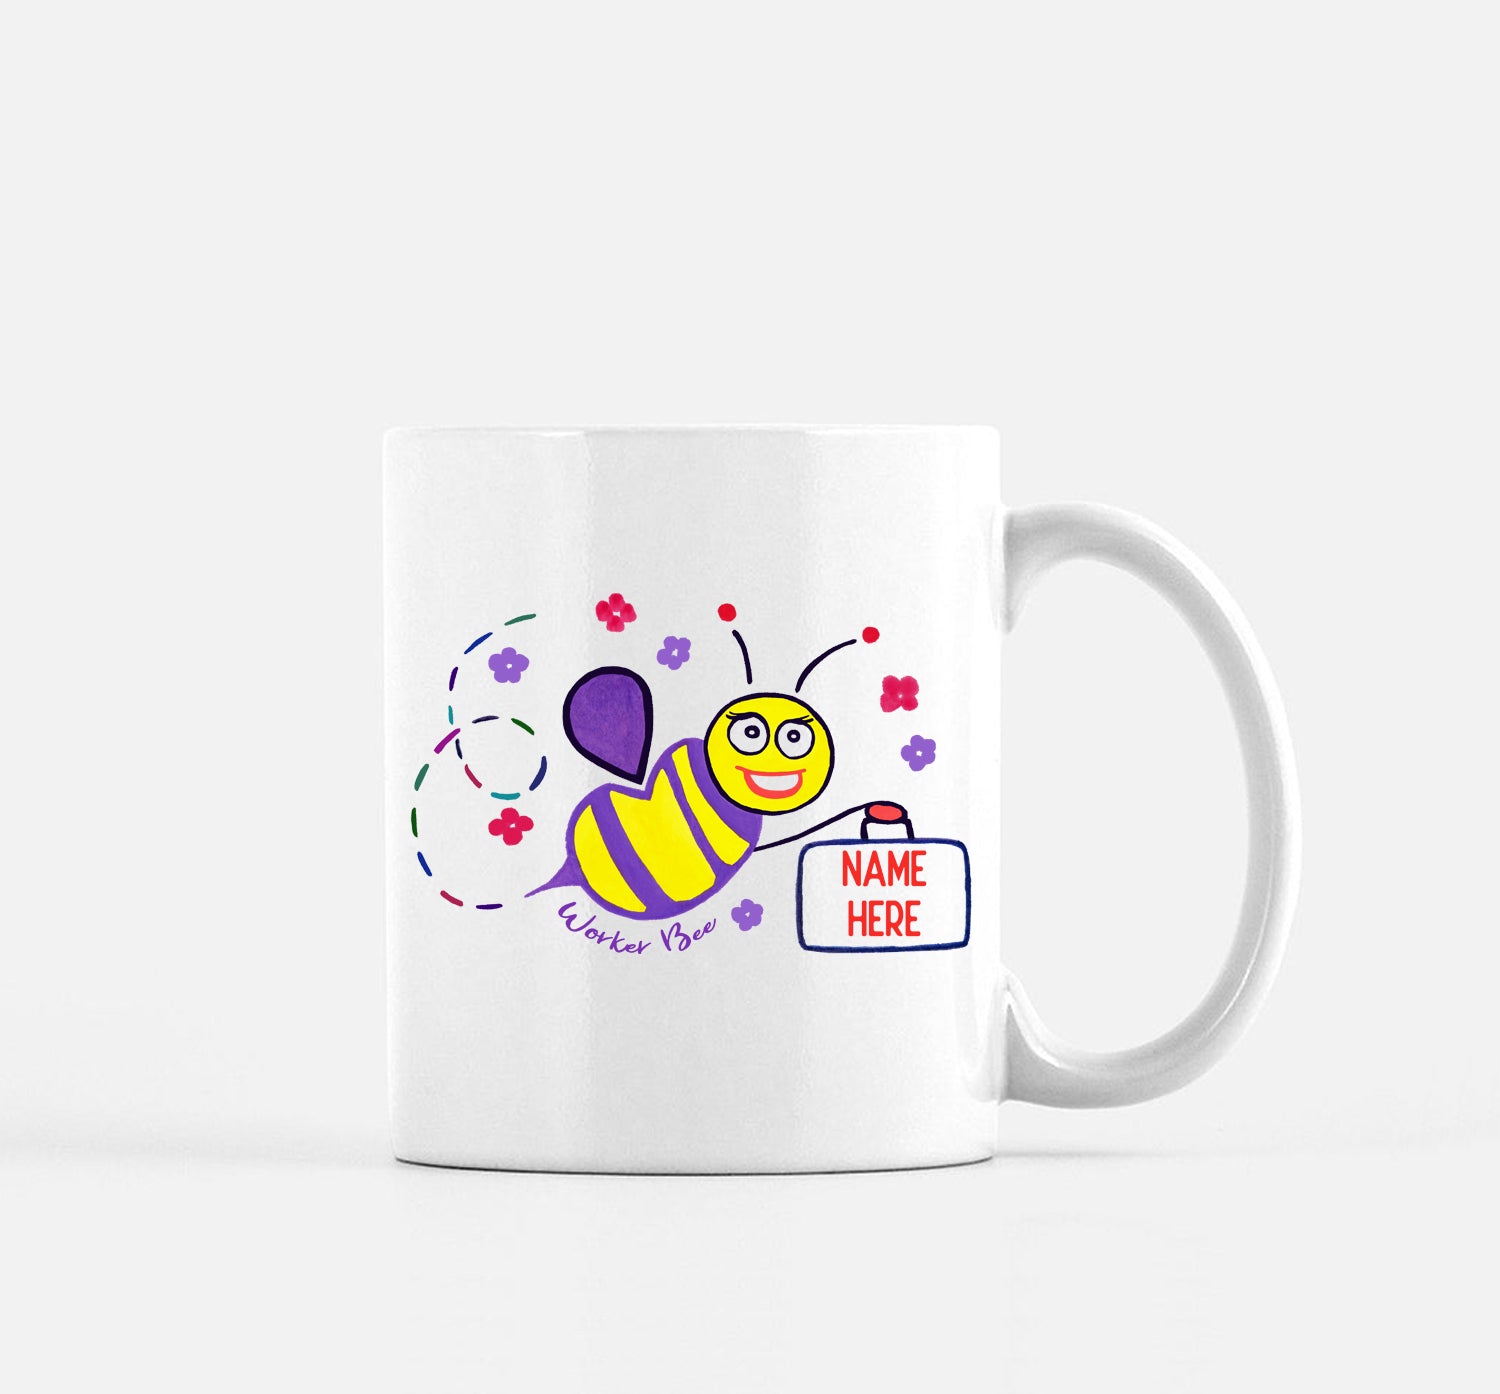 Funny Accountant Gifts, Accountants are not boring..., Sarcasm Two Tone Mug  For Women Men Tax Accountanting sold by Funny Mug Shop on Storenvy